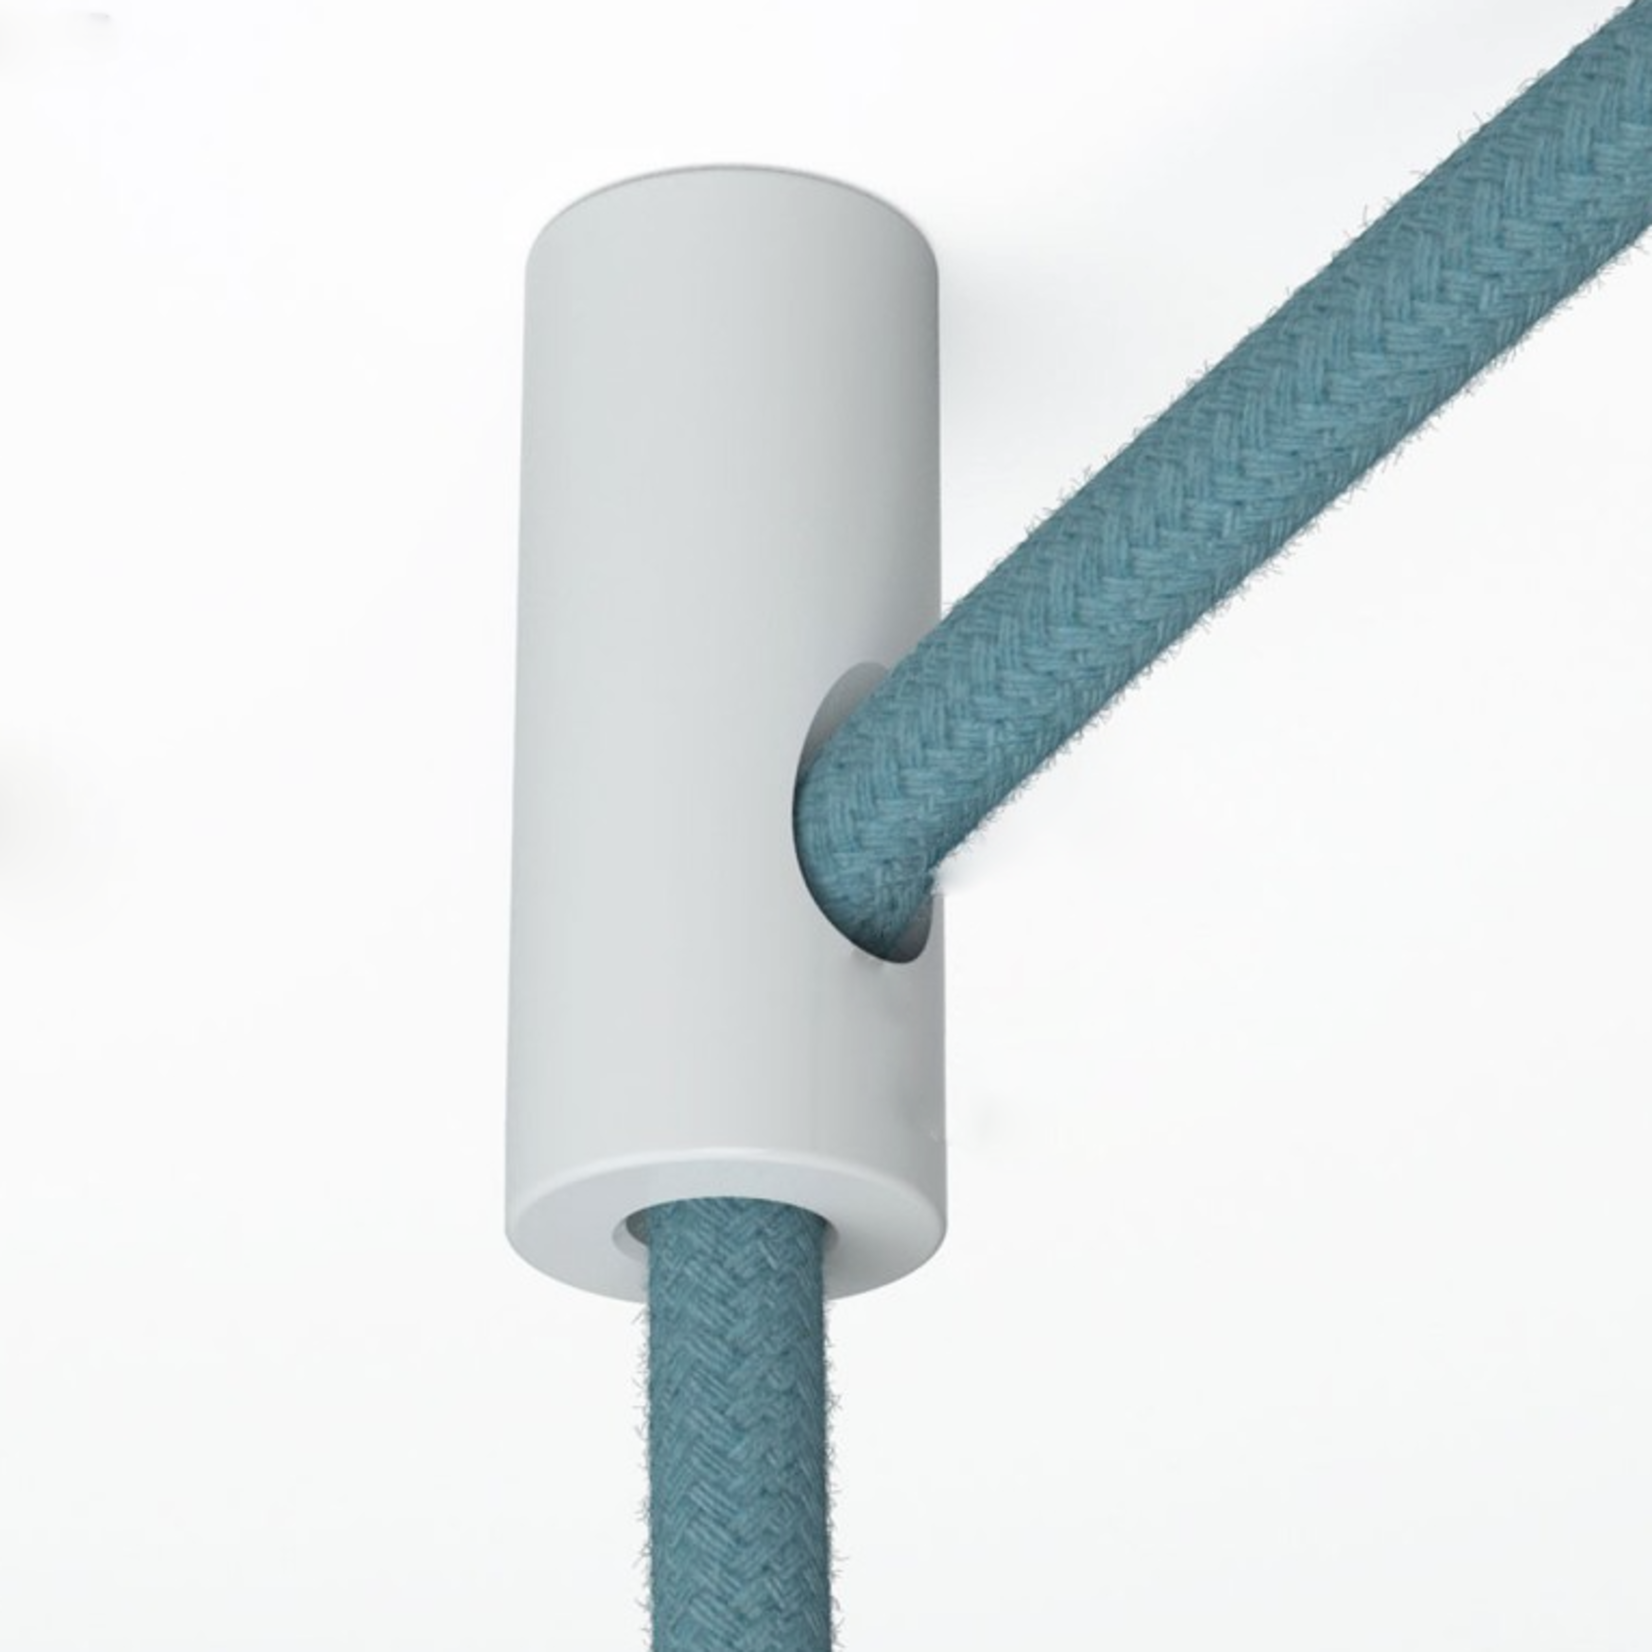 CCIT Cable Drop and Grip White Plastic ceiling hook and stop fabric cable grip for cable